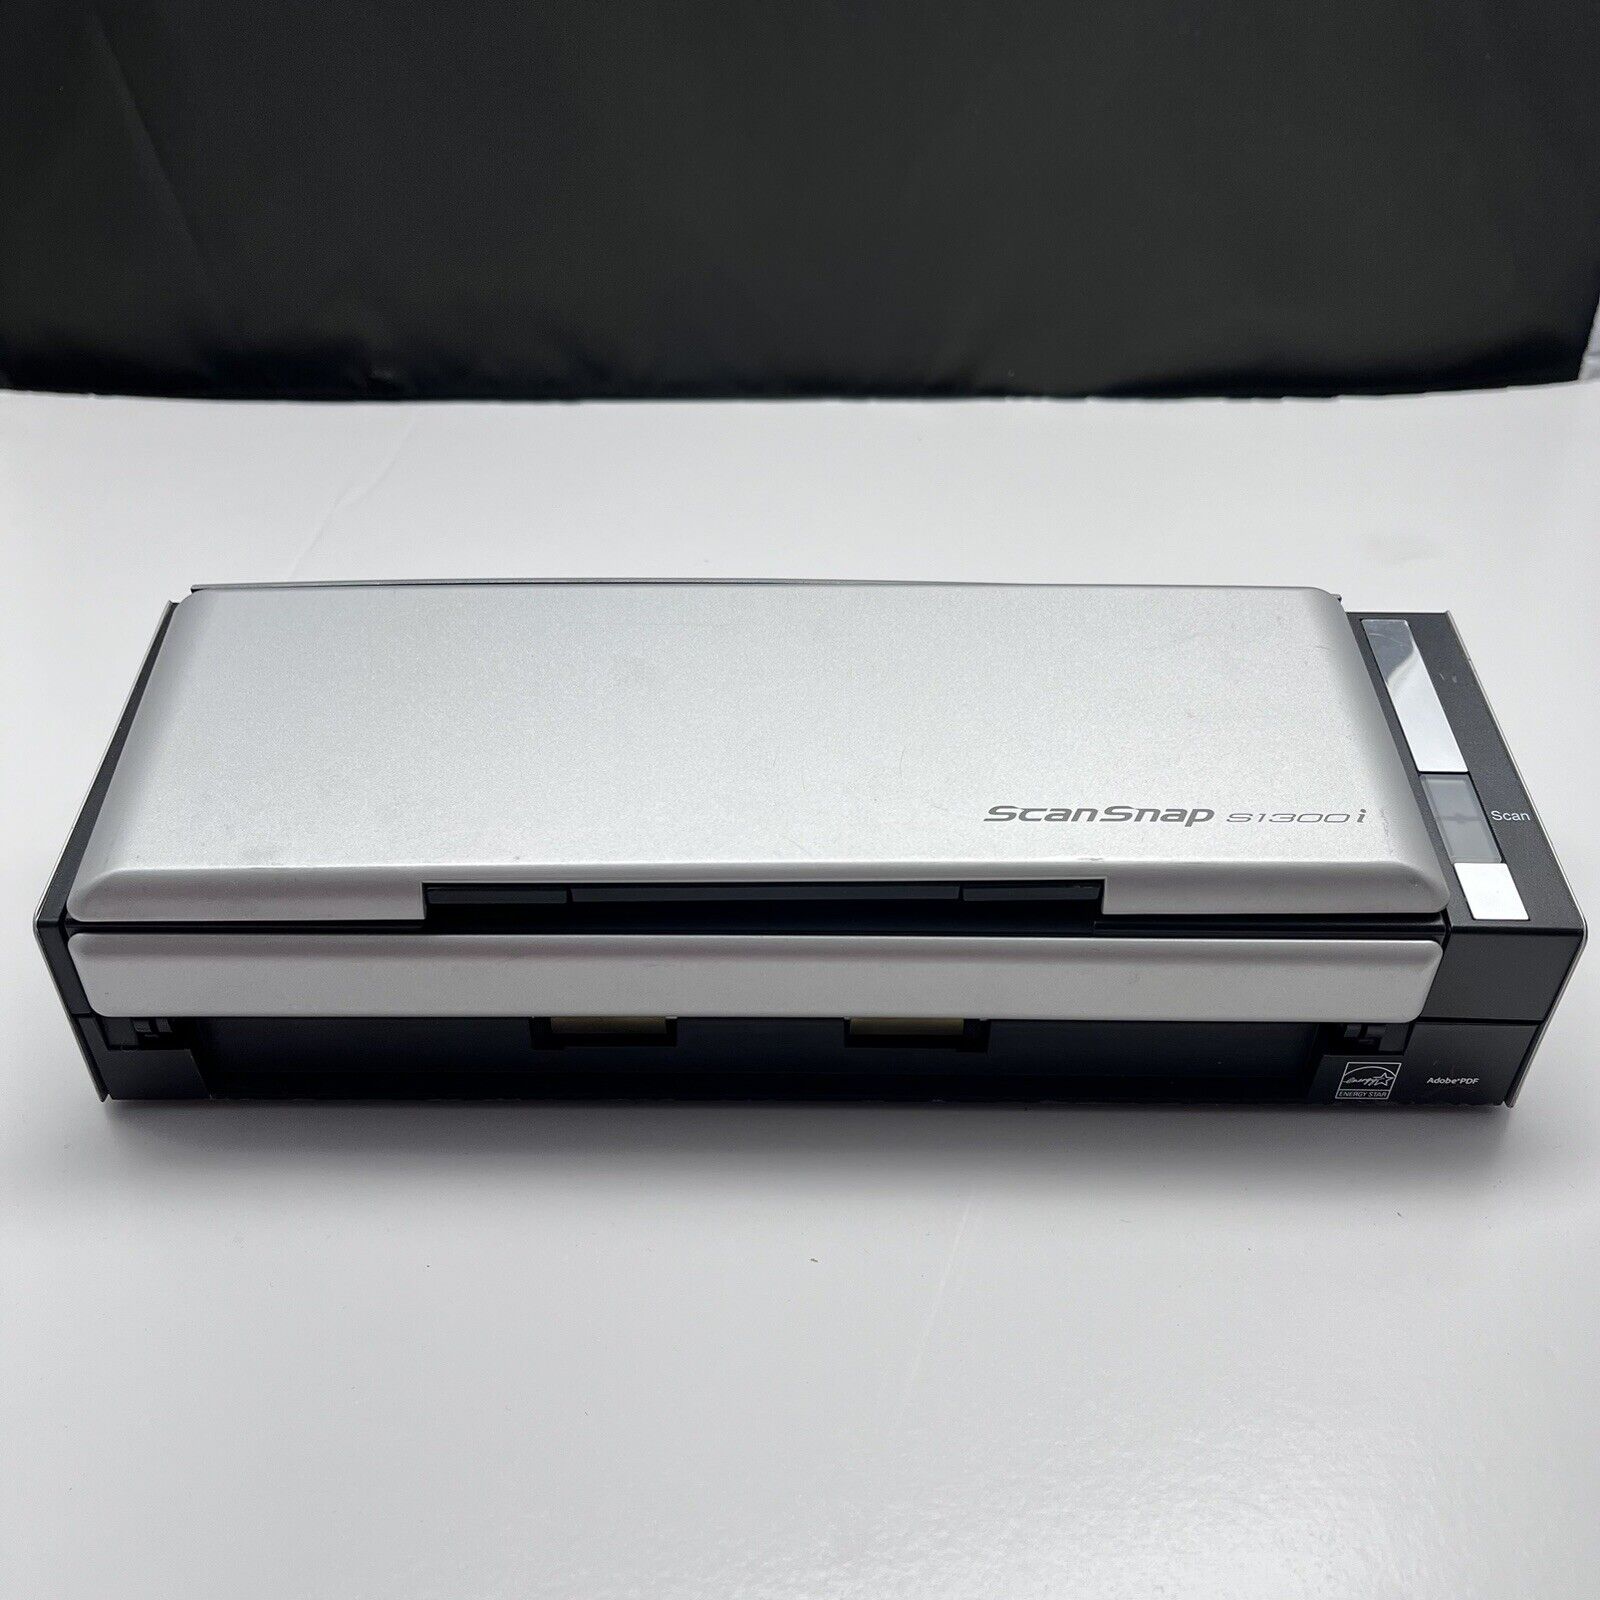 Fujitsu ScanSnap S1300i Duplex Portable Color Document Scanner USB Sold As Is